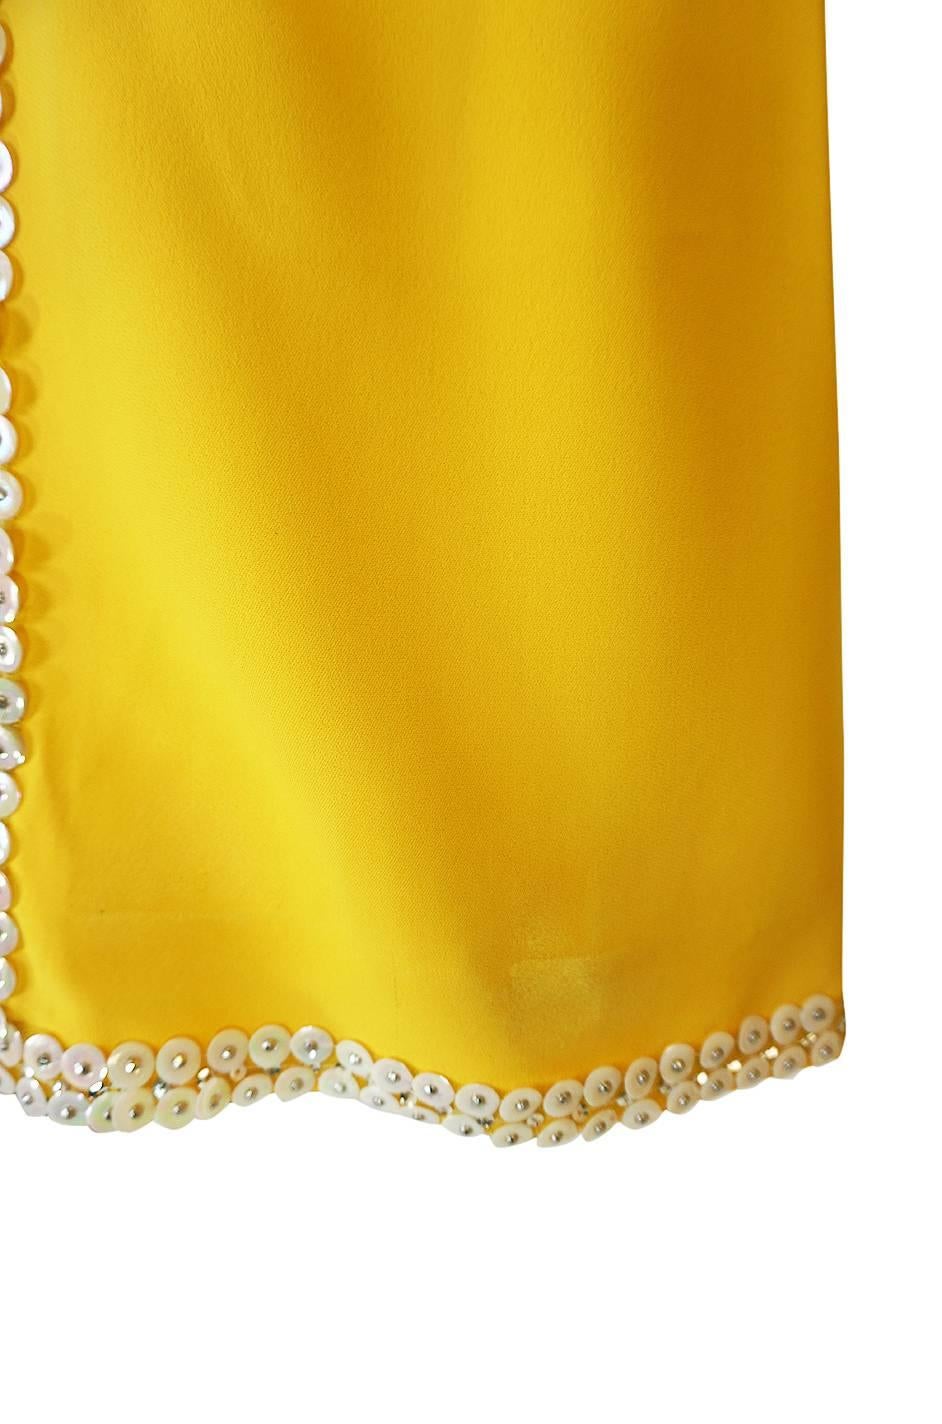 Chloe by Karl Lagerfeld Stud and Paillettes Yellow Mini Dress circa 1967 4